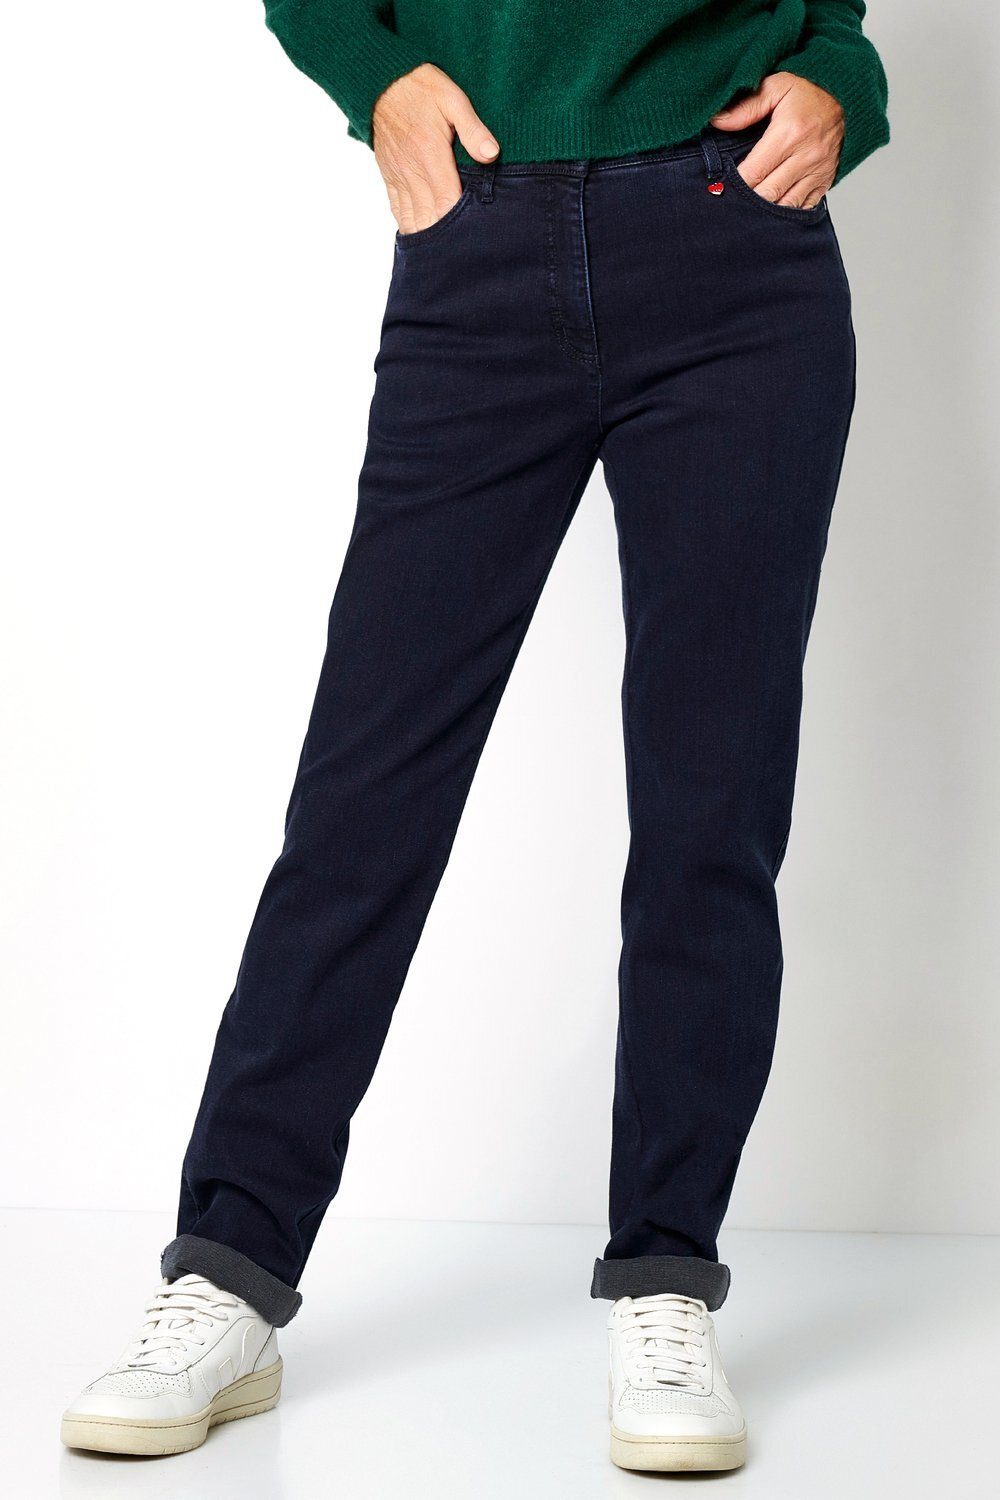 legerer Relaxed 5-Pocket-Jeans My Love in dunkelblau - TONI 058 Passform by